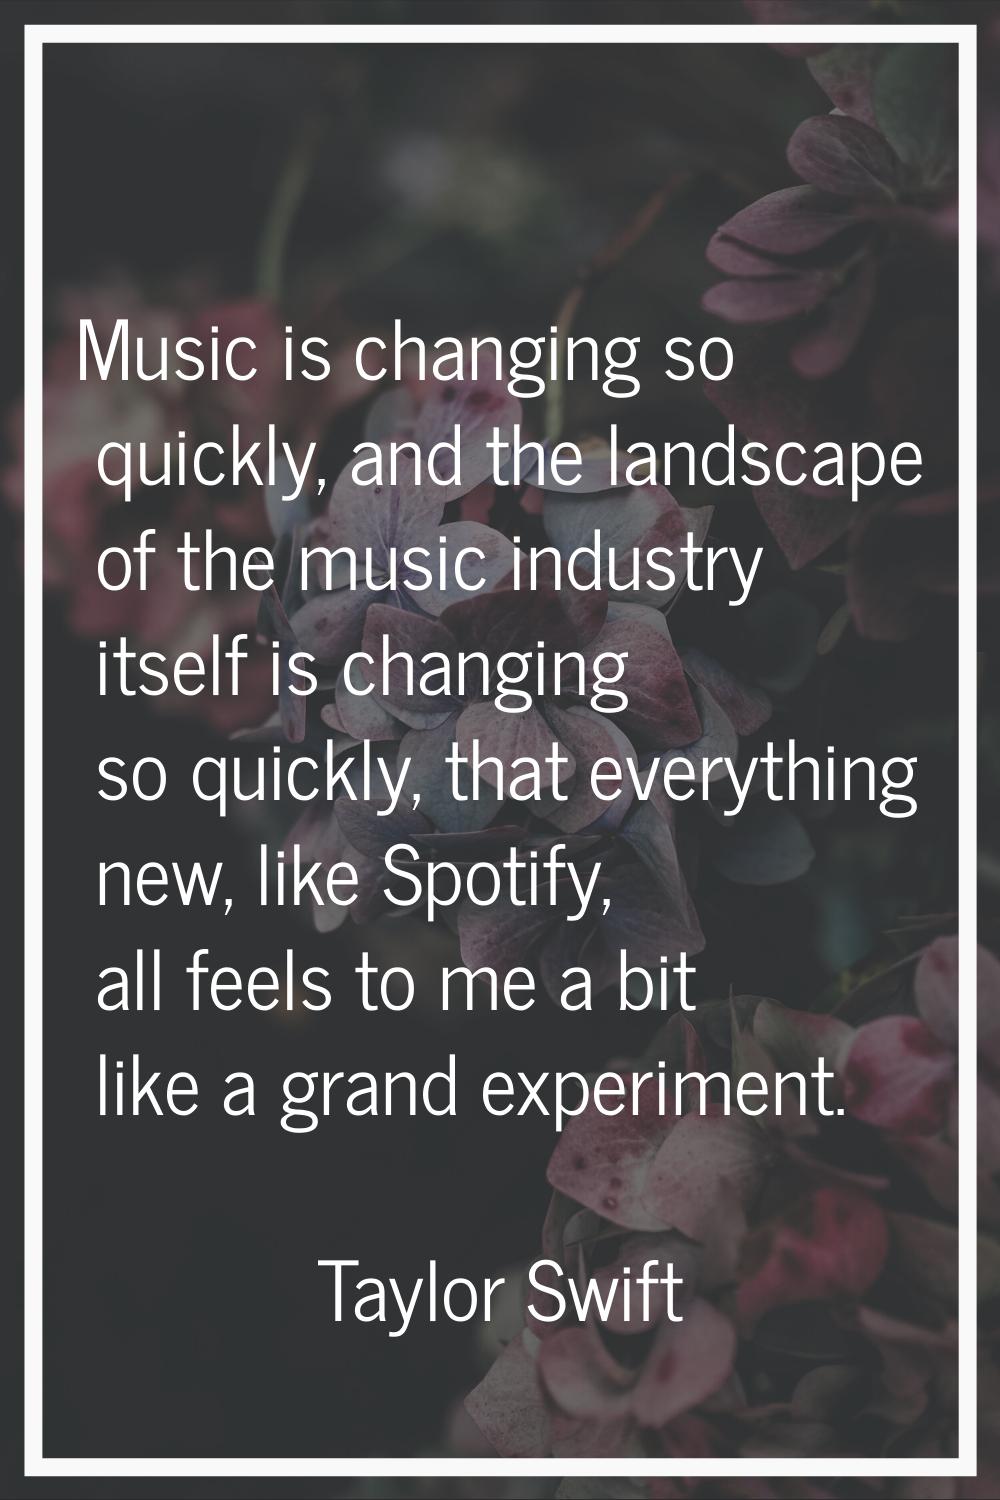 Music is changing so quickly, and the landscape of the music industry itself is changing so quickly